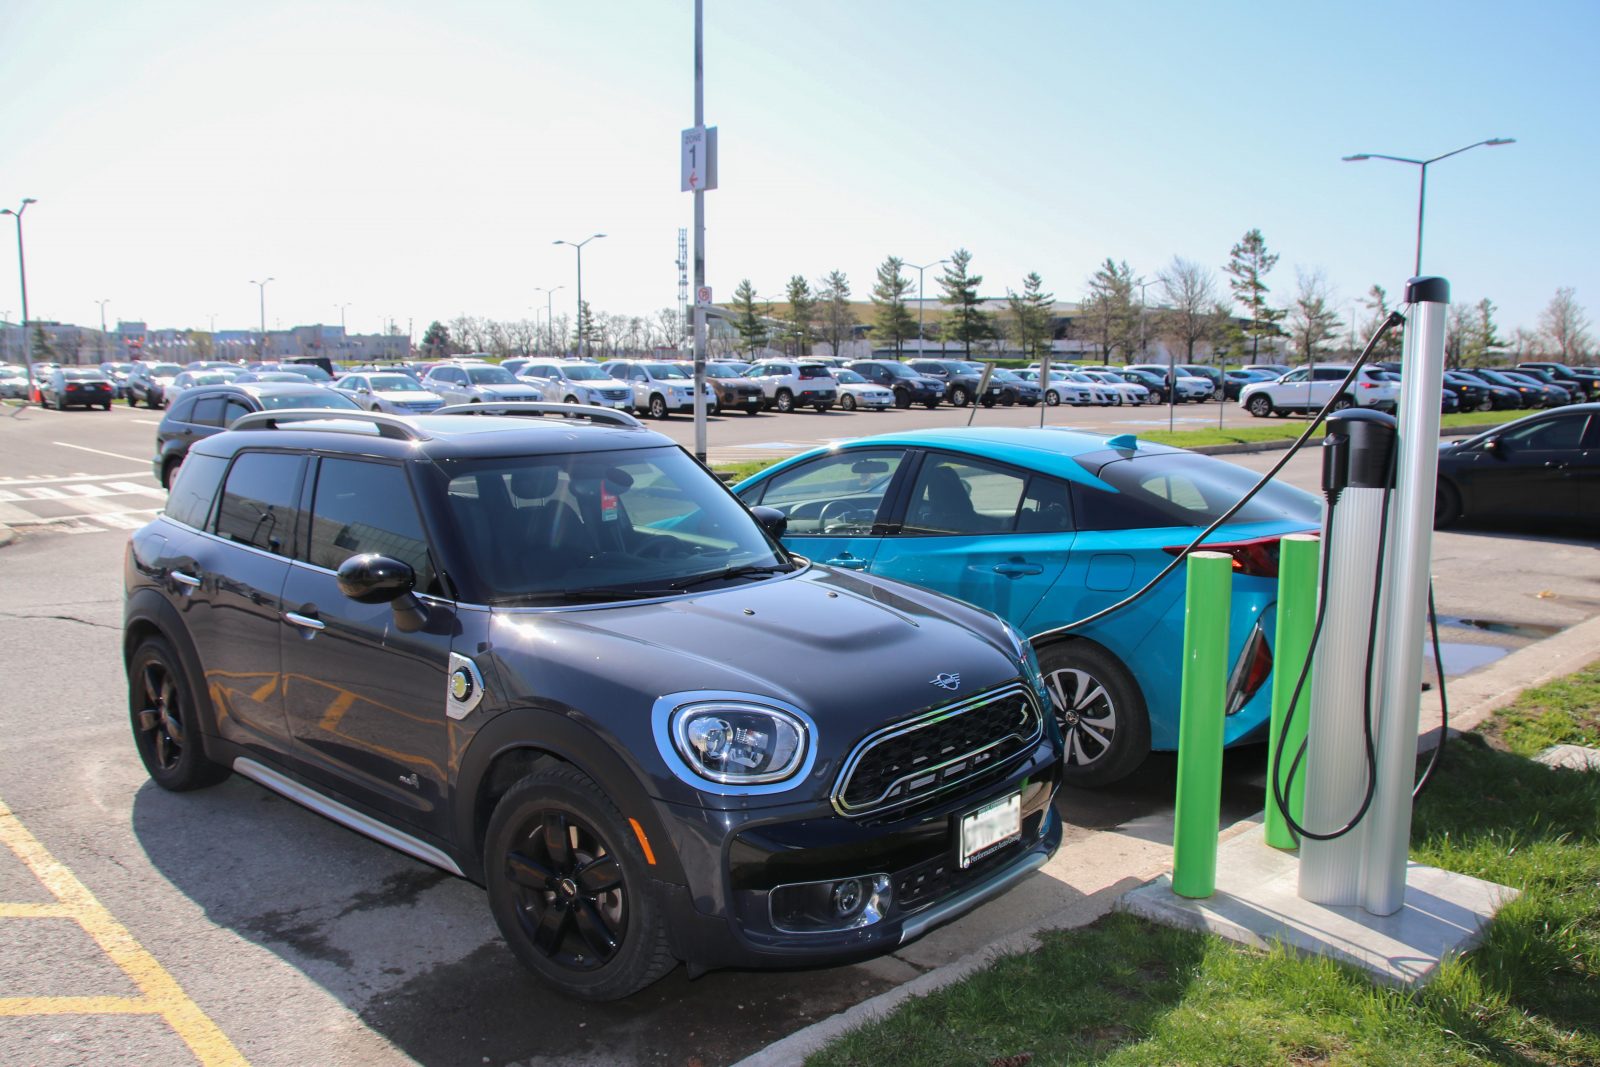 Two cars sit plugged into an electric vehicle charging station in front of a parking lot full of additional cars.